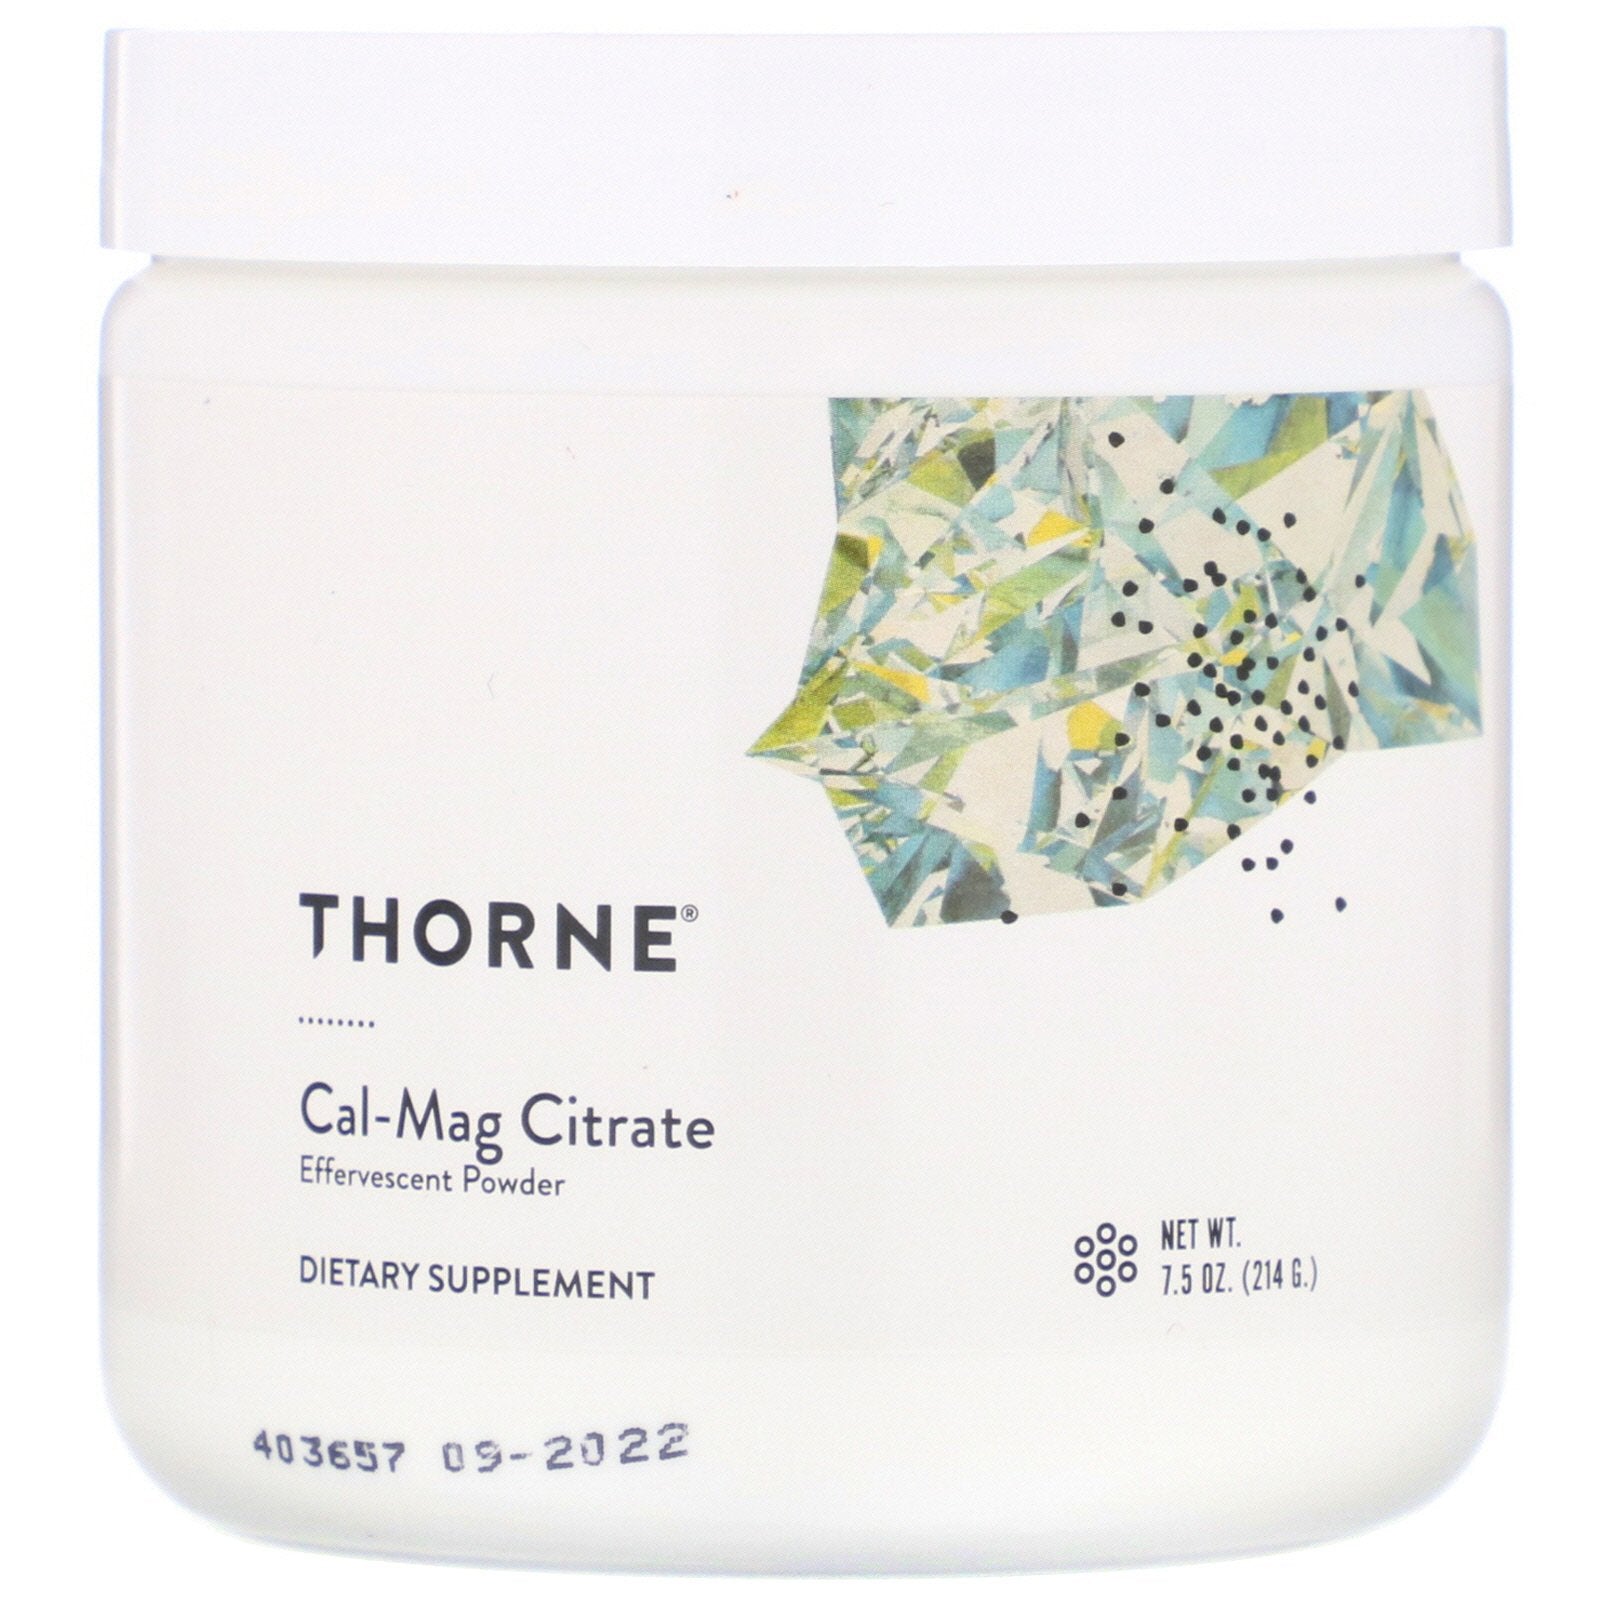 Thorne Research, Cal-Mag Citrate, Effervescent Powder (214 g)